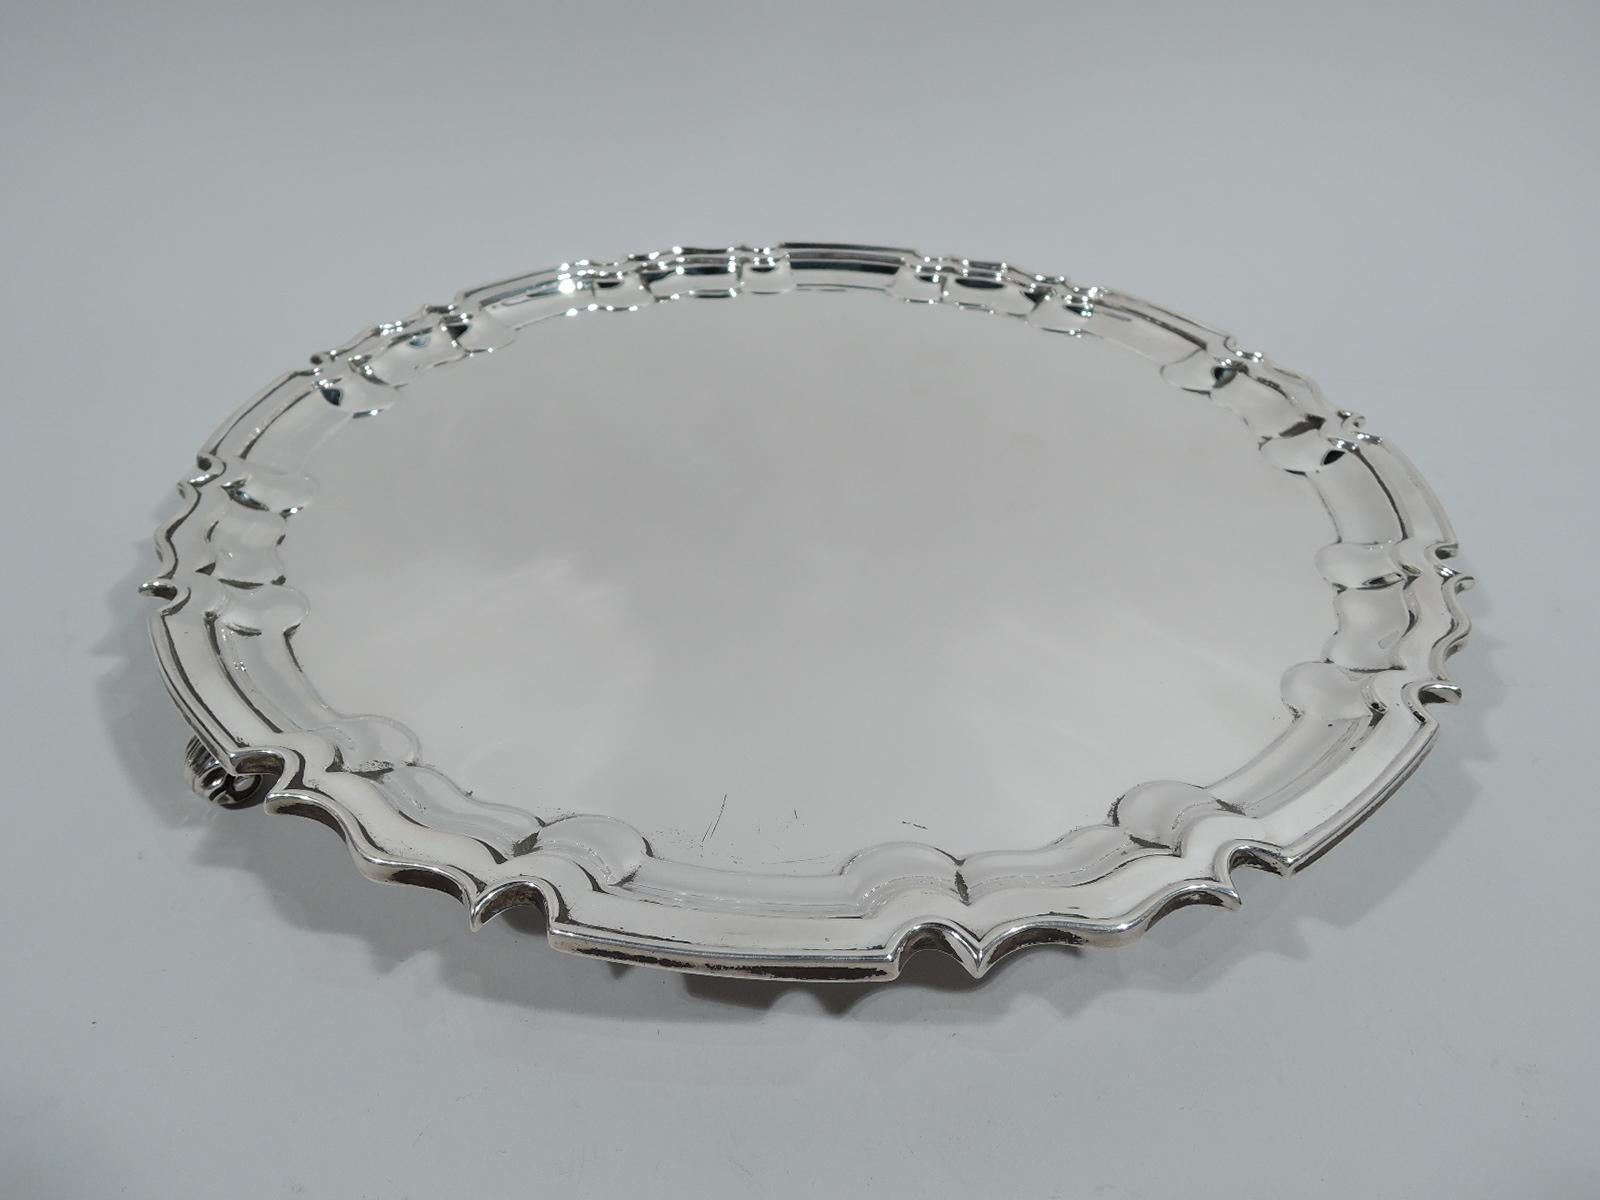 Edwardian Georgian sterling silver salver. Made by William Hutton & Sons, Ltd in London in 1905. Round with crisp and molded curvilinear piecrust rim. Three leaf-capped volute-scroll supports. Fully marked. Heavy weight: 33.5 troy ounces.